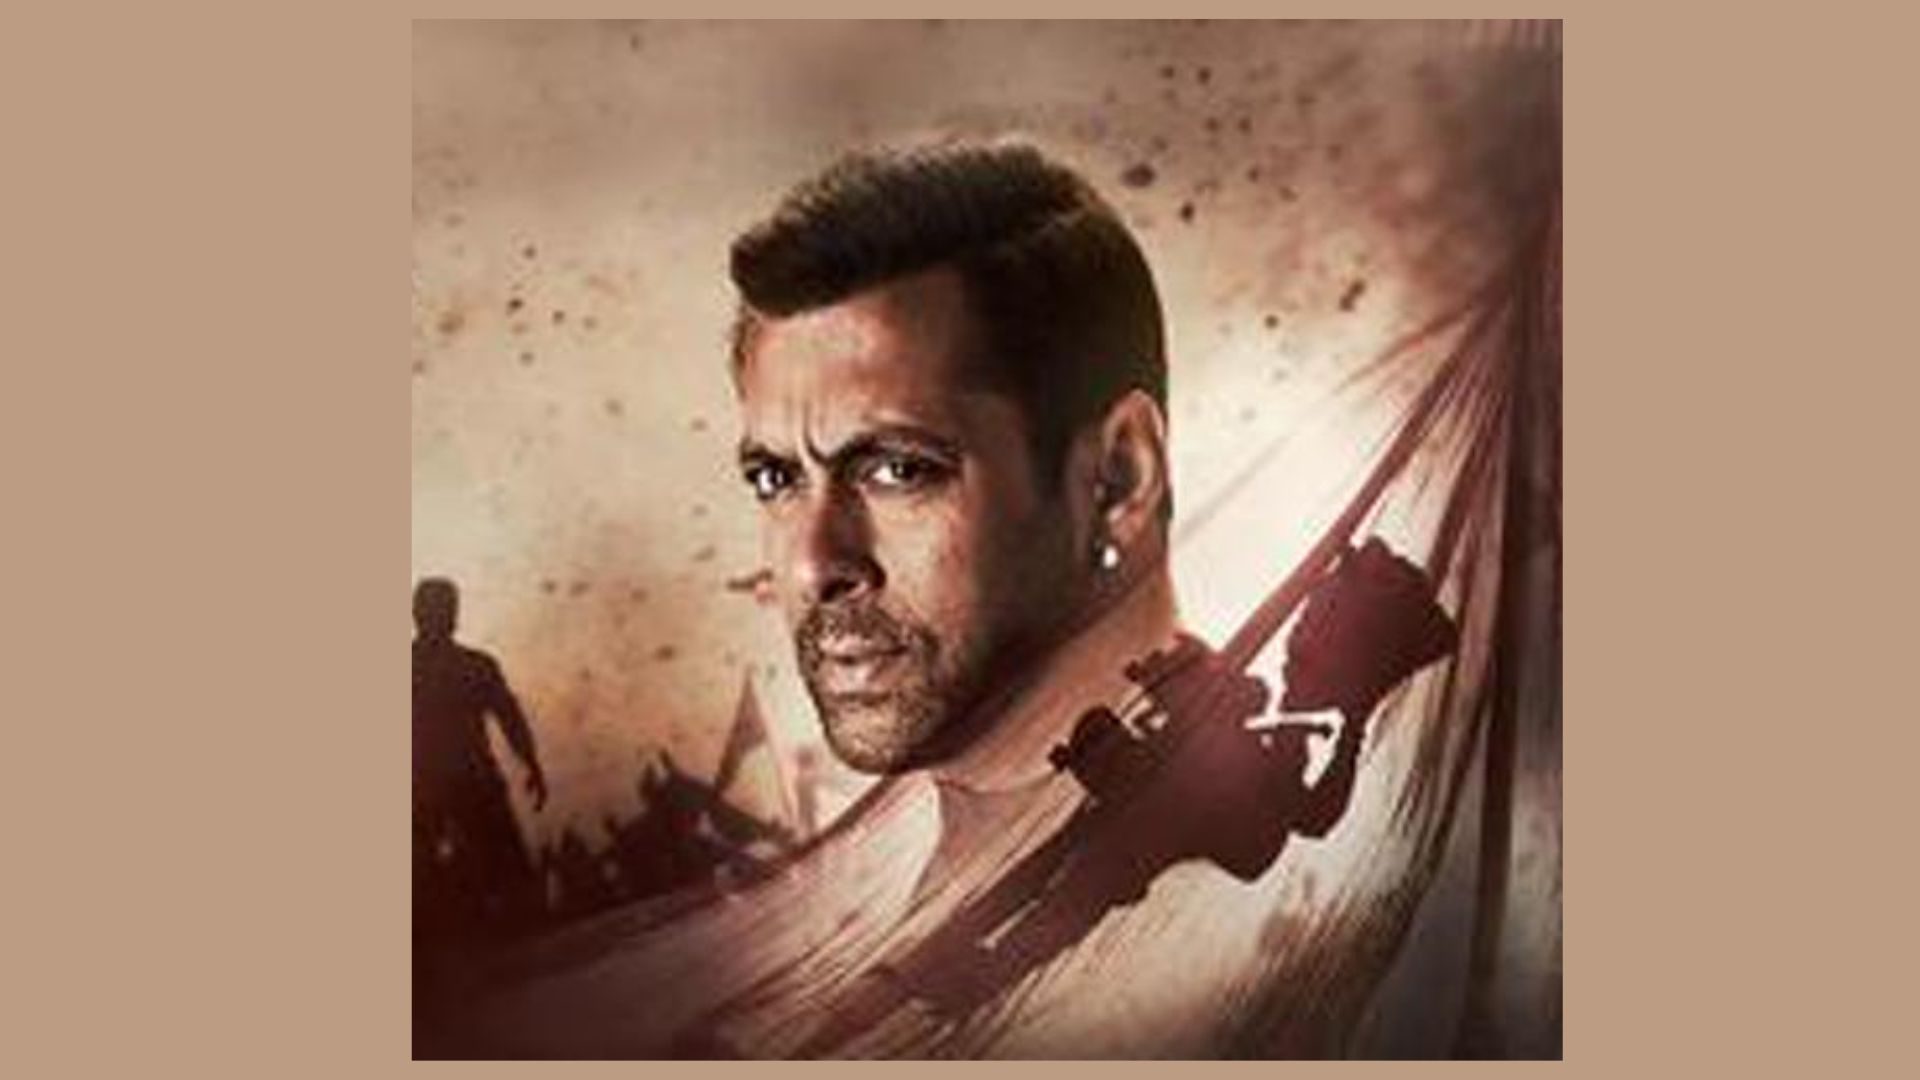 The script for Bajrangi Bhaijaan 2 has been finalized and will be presented to Salman Khan in the near future.